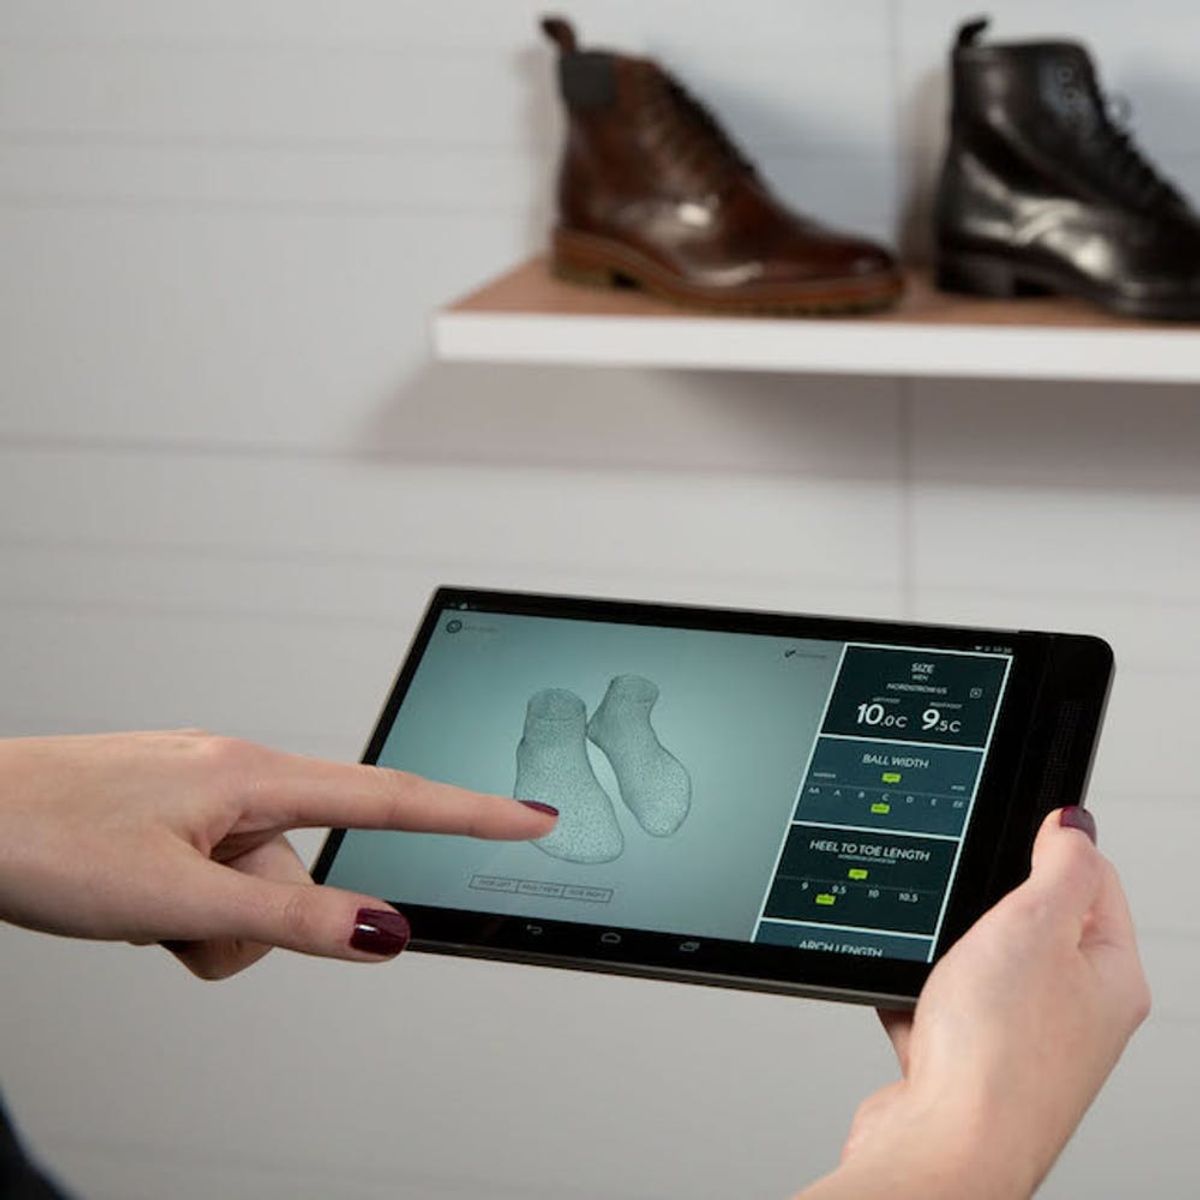 Intel + Nordstrom’s New Technology Will Make Shoe Shopping Even More Fun